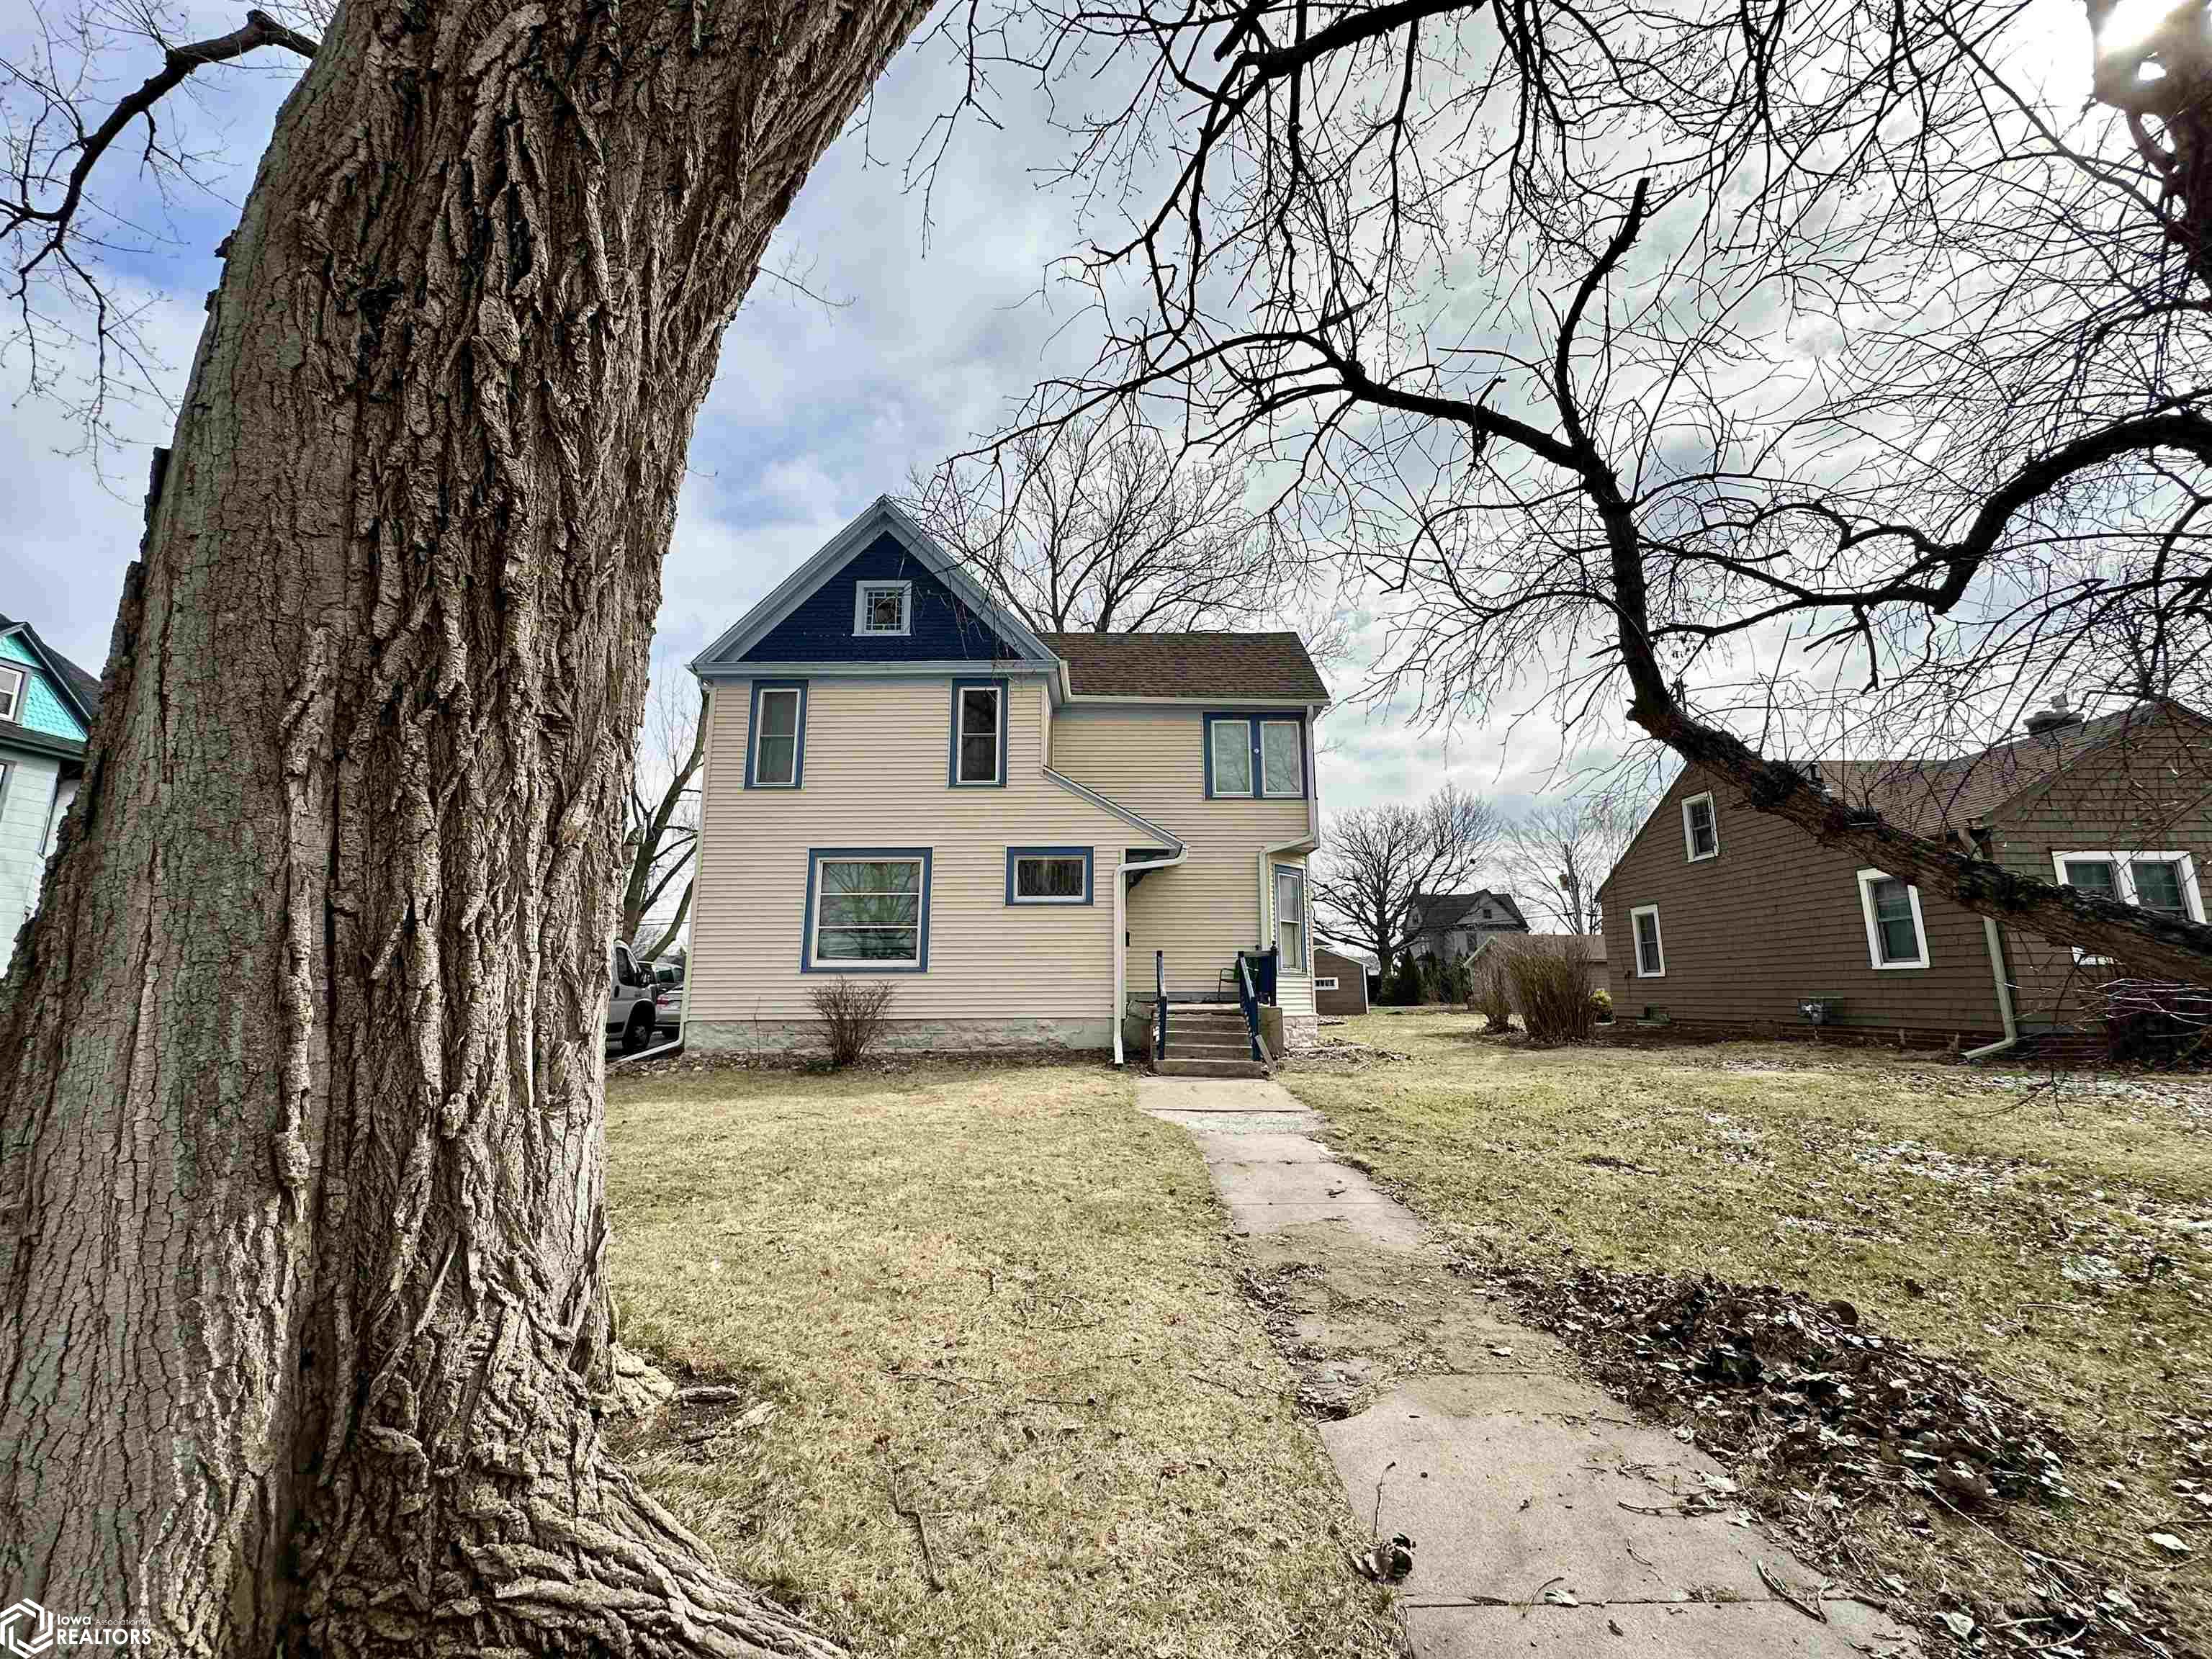 824 High, Grinnell, Iowa 50112, 4 Bedrooms Bedrooms, ,2 BathroomsBathrooms,Single Family,For Sale,High,6315373